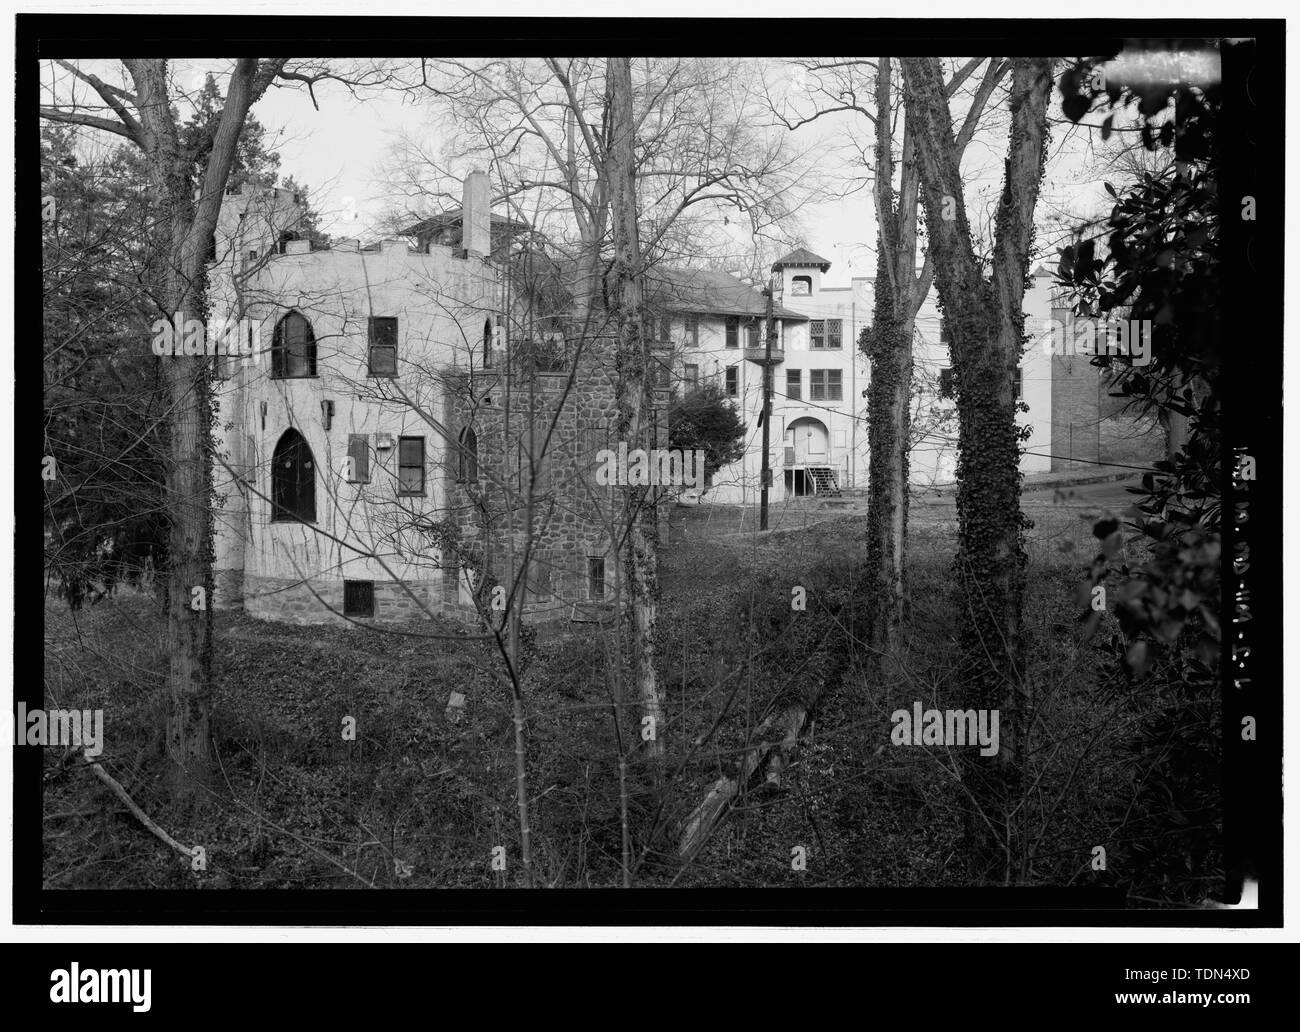 Perspective view looking from the southwest - National Park Seminary, Castle, Ravine in northeast part of campus, Silver Spring, Montgomery County, MD; Pi Beta Nu sorority; Ament, James E; Price, Virginia B, transmitter; Ott, Cynthia, historian; Boucher, Jack E, photographer; Price, Virginia B, transmitter; Lavoie, Catherine C, project manager Stock Photo